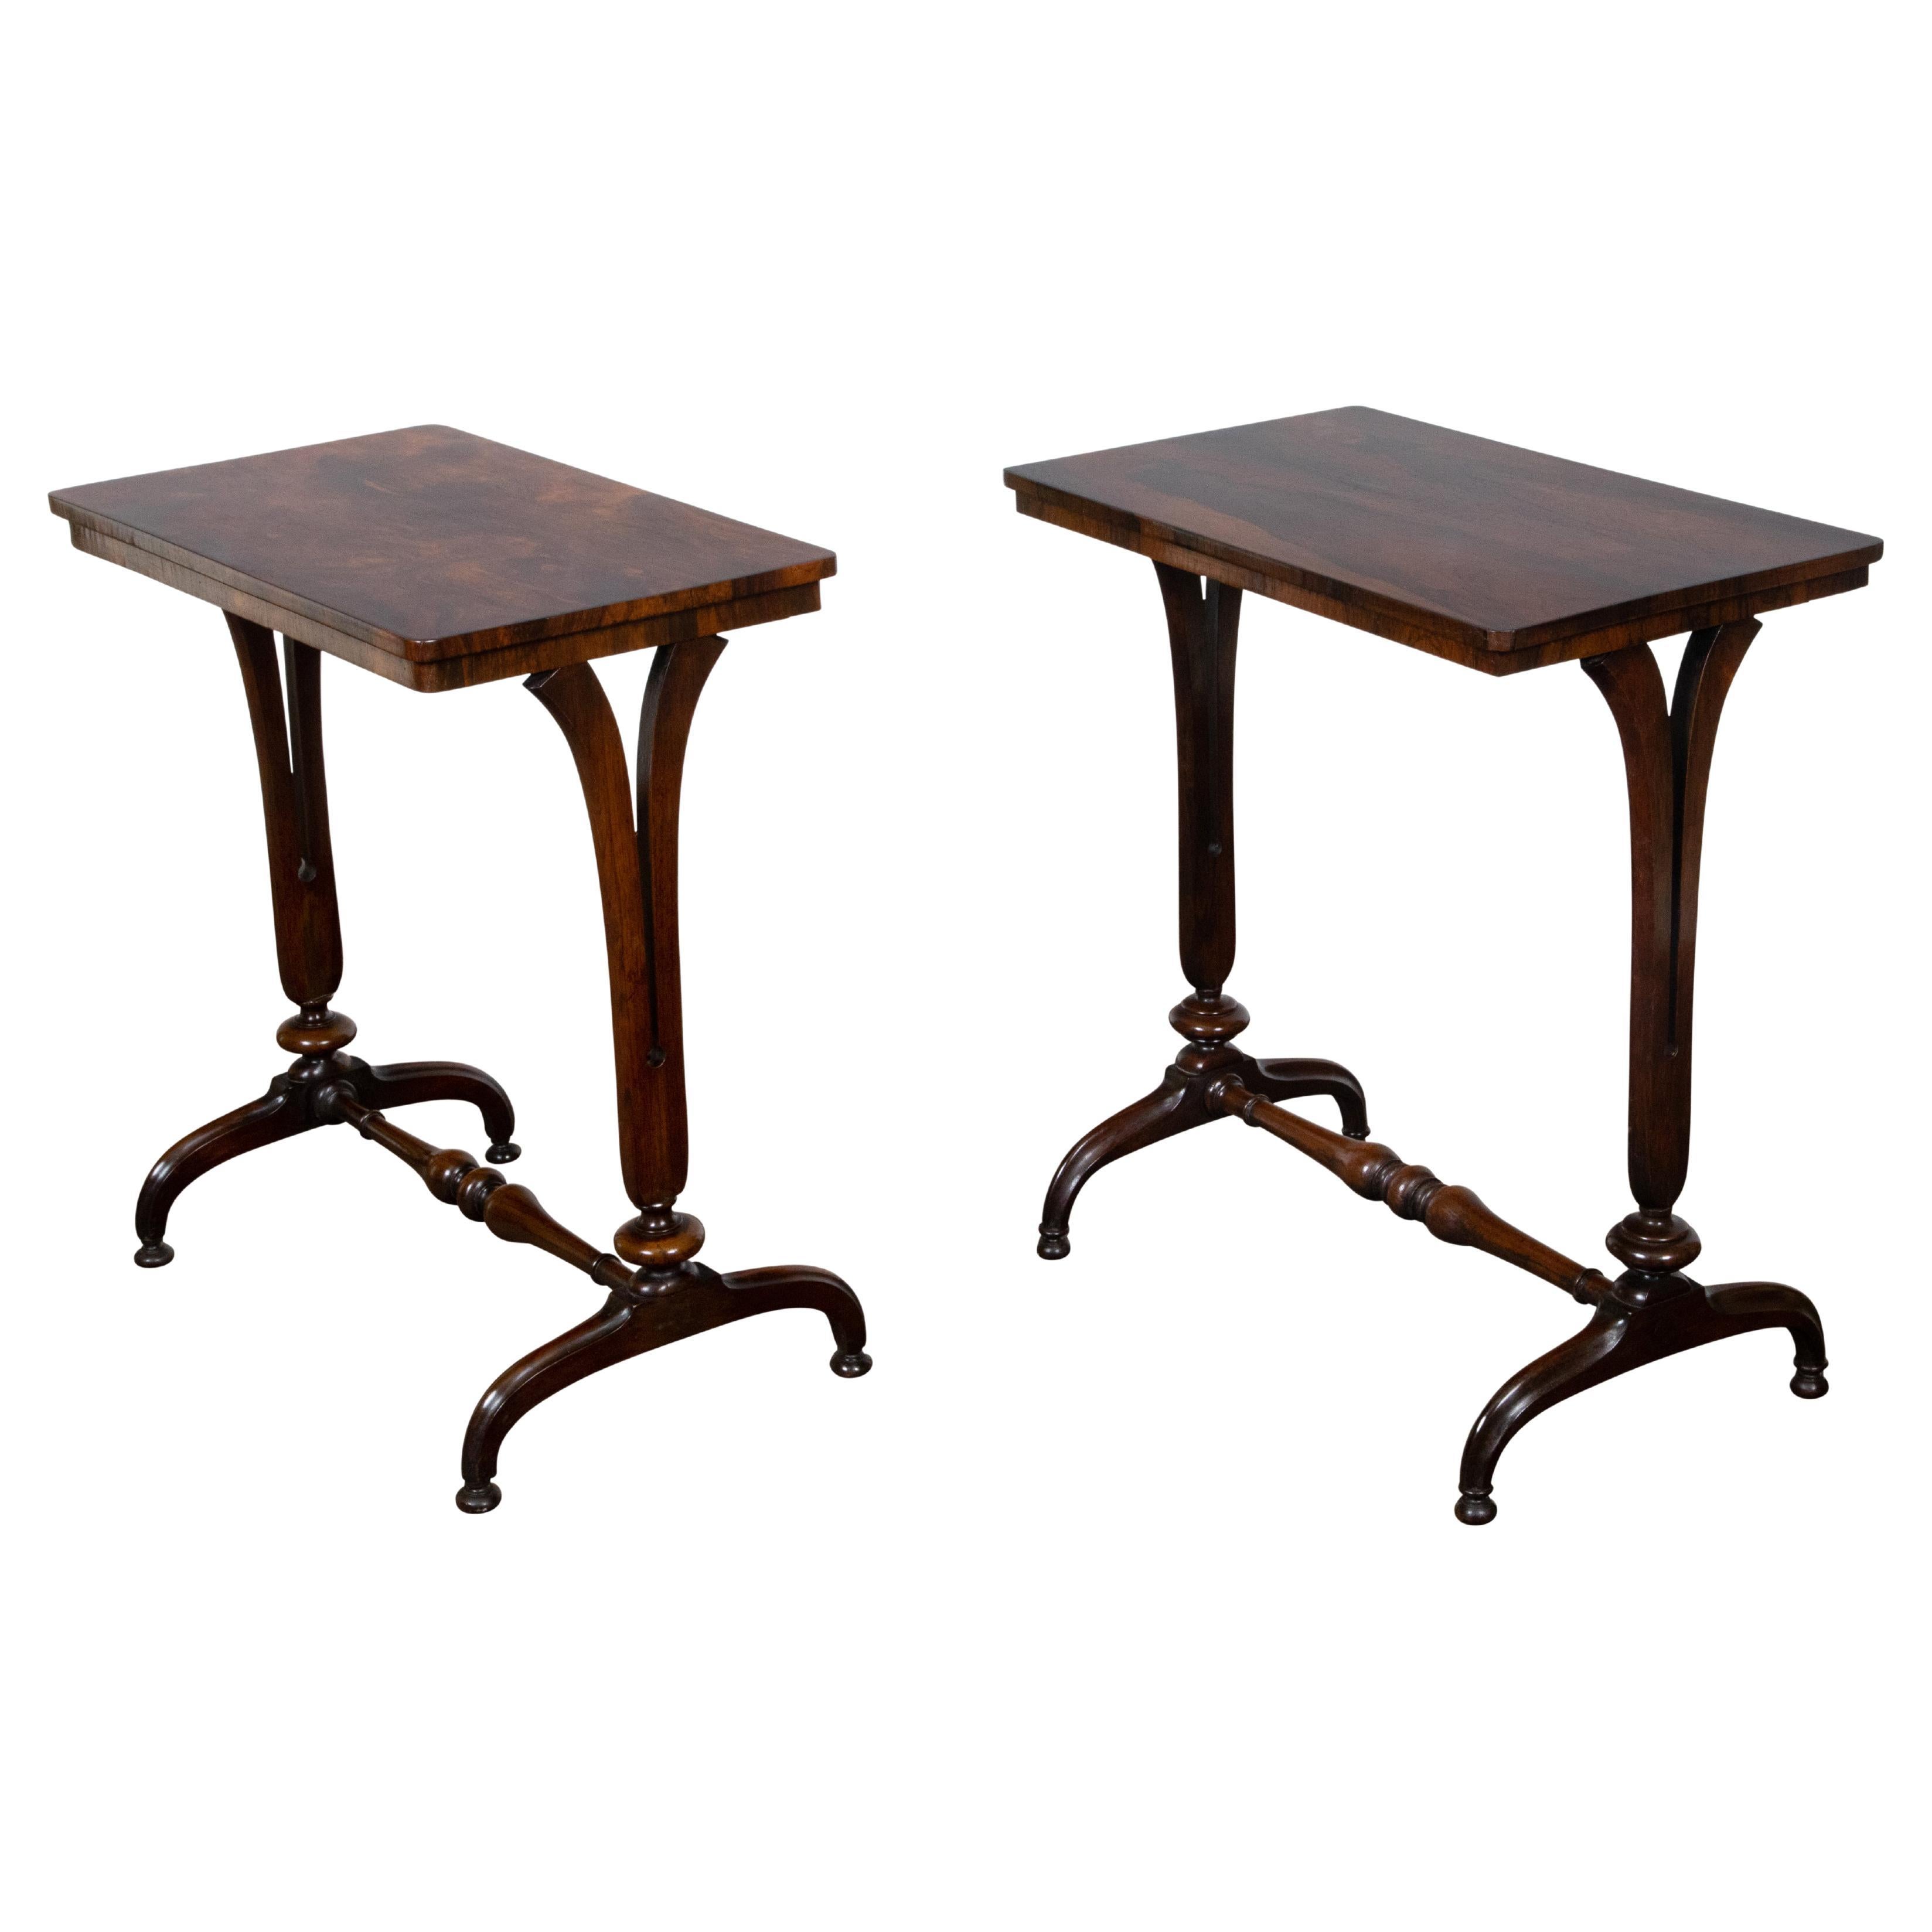 Pair of English Regency 19th Century Console Tables with Veneered Tops